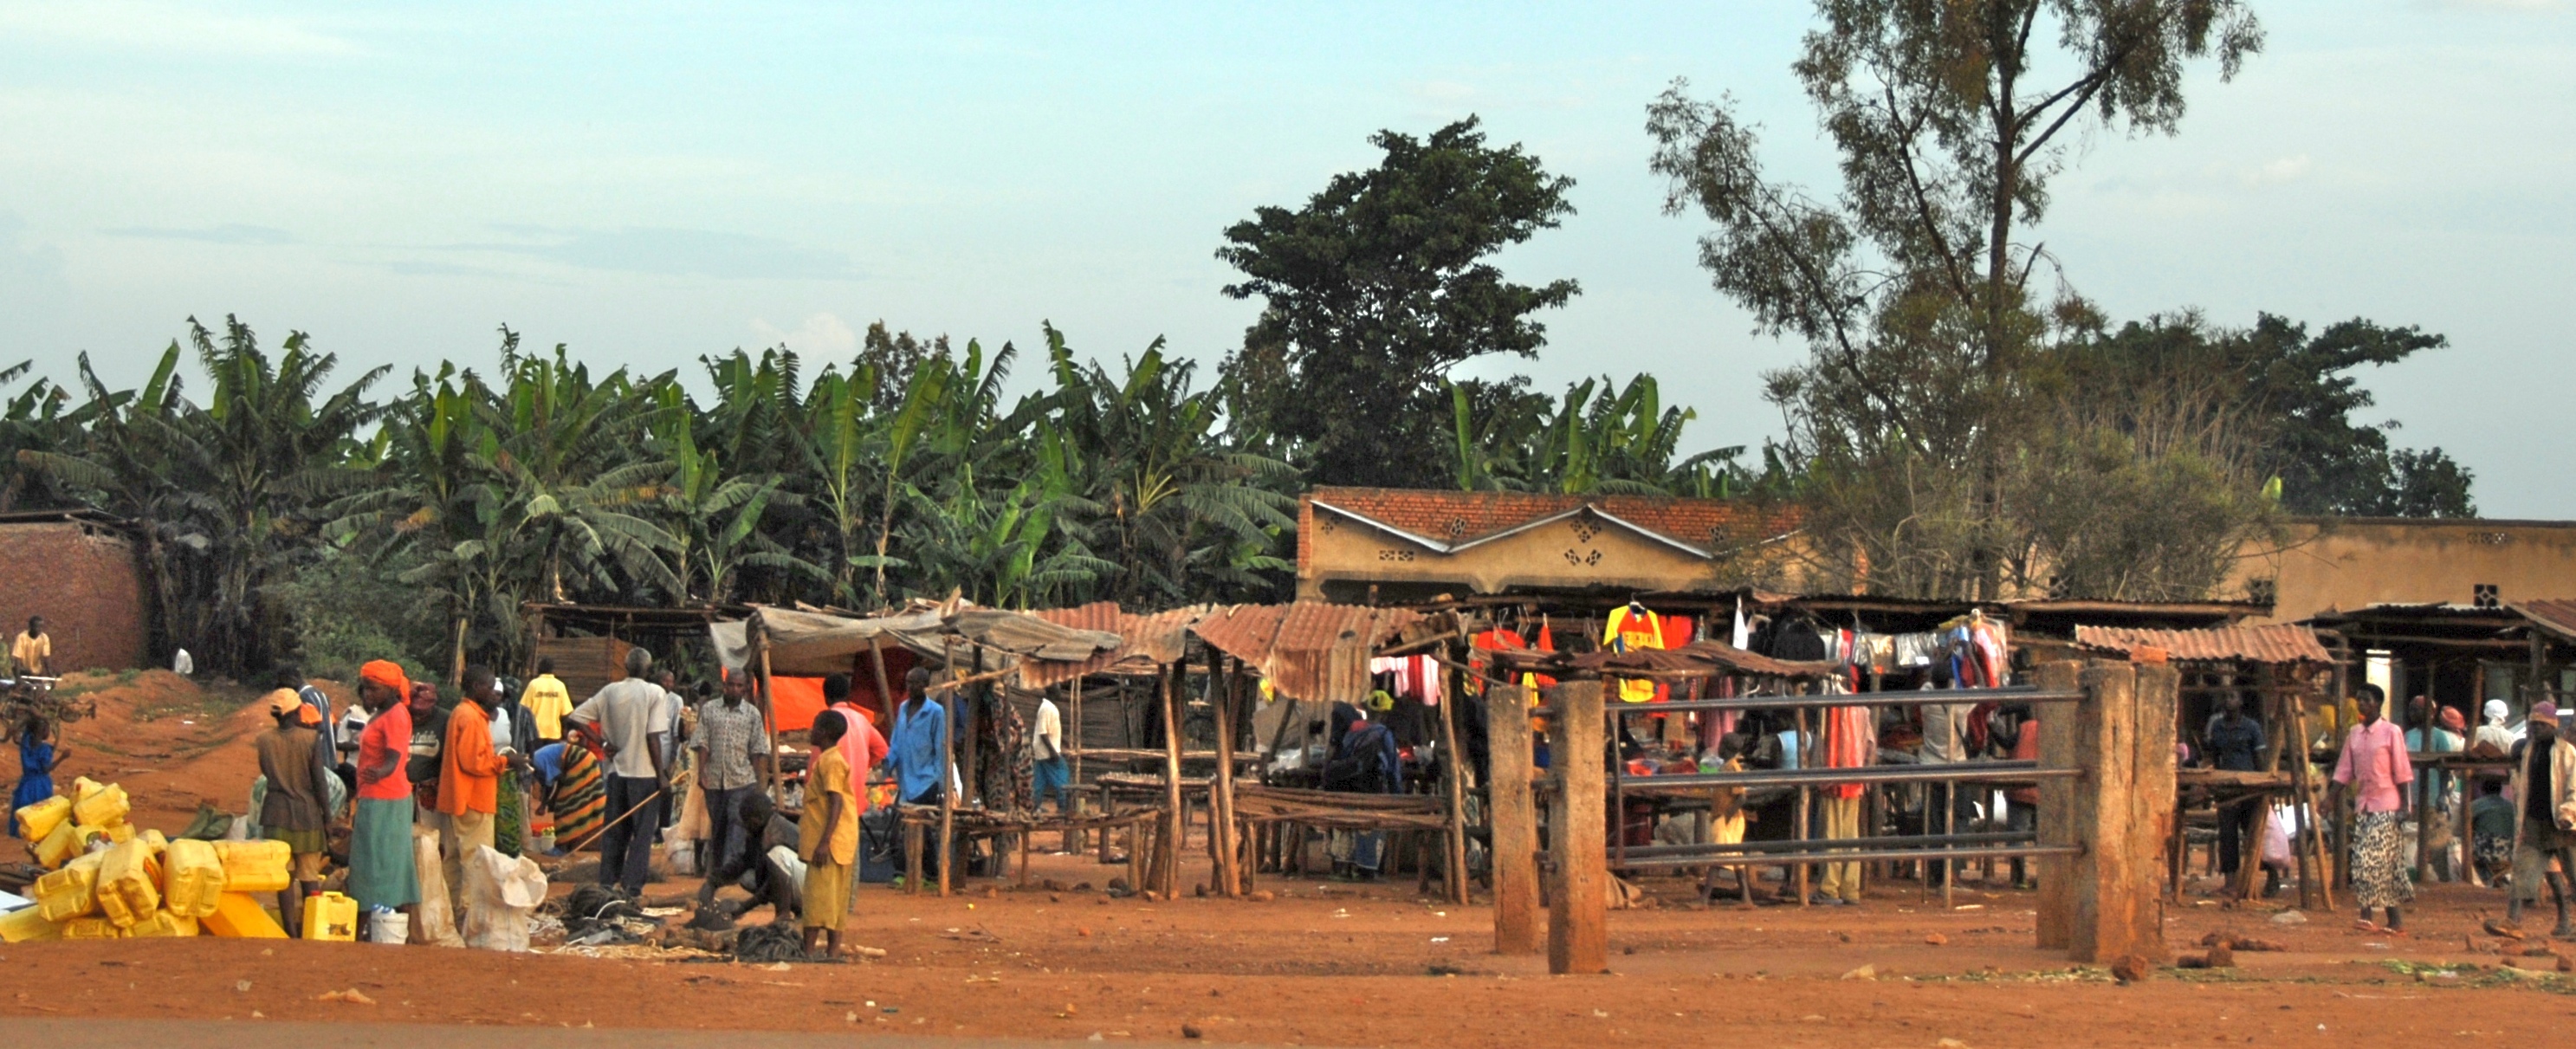 several people outside of their village with some houses and a lot of trees